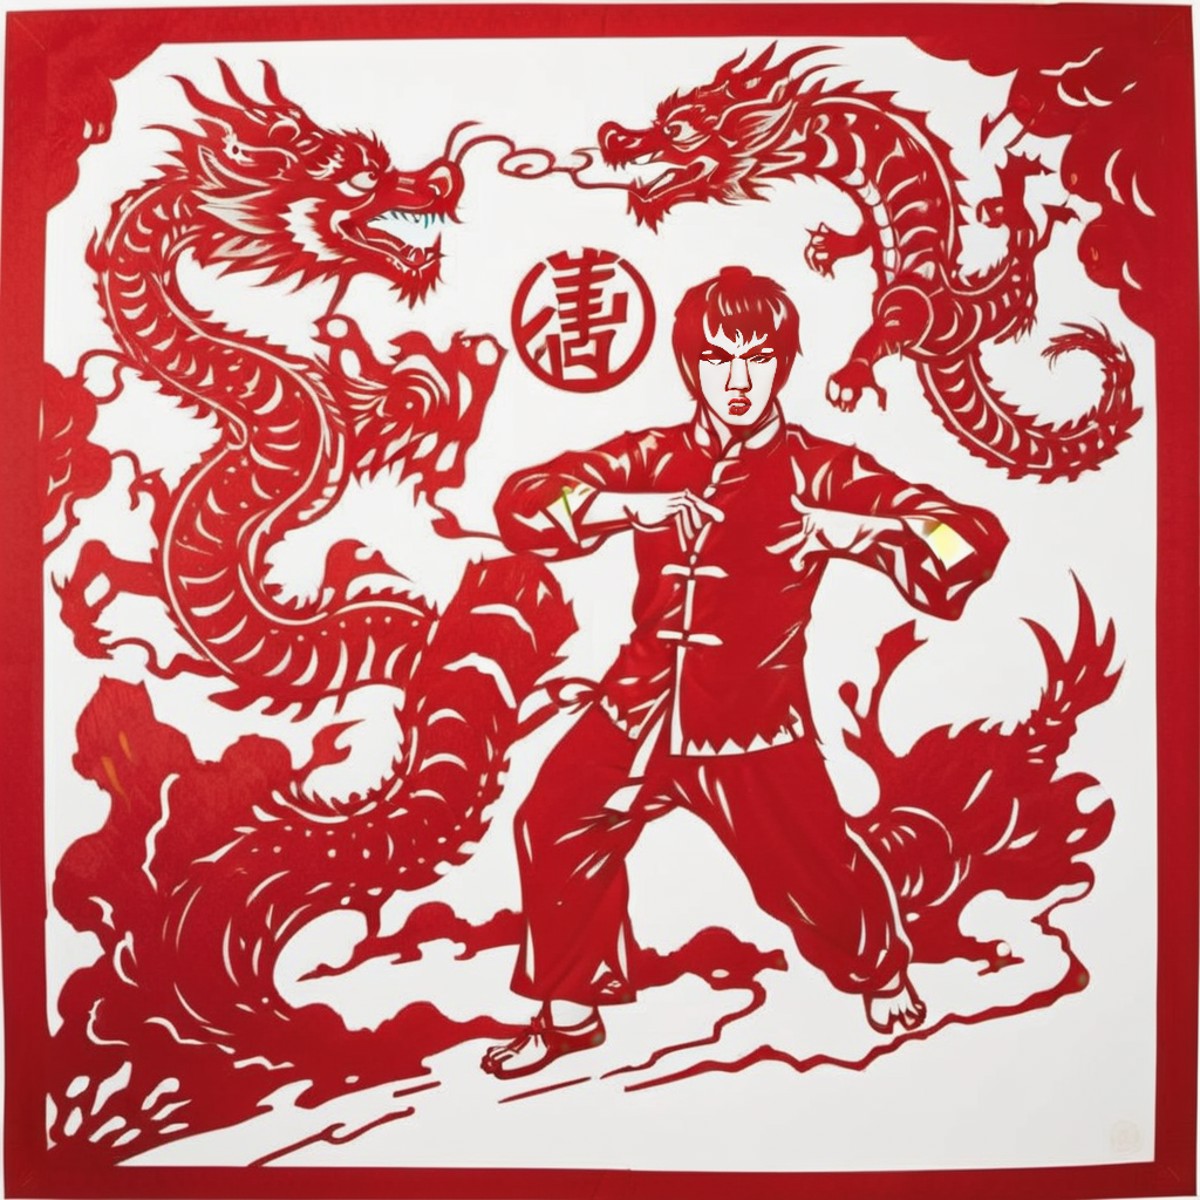 The image is a traditional Chinese paper-cut art piece, featuring the iconic figure of Bruce Lee in action, capturing the ...